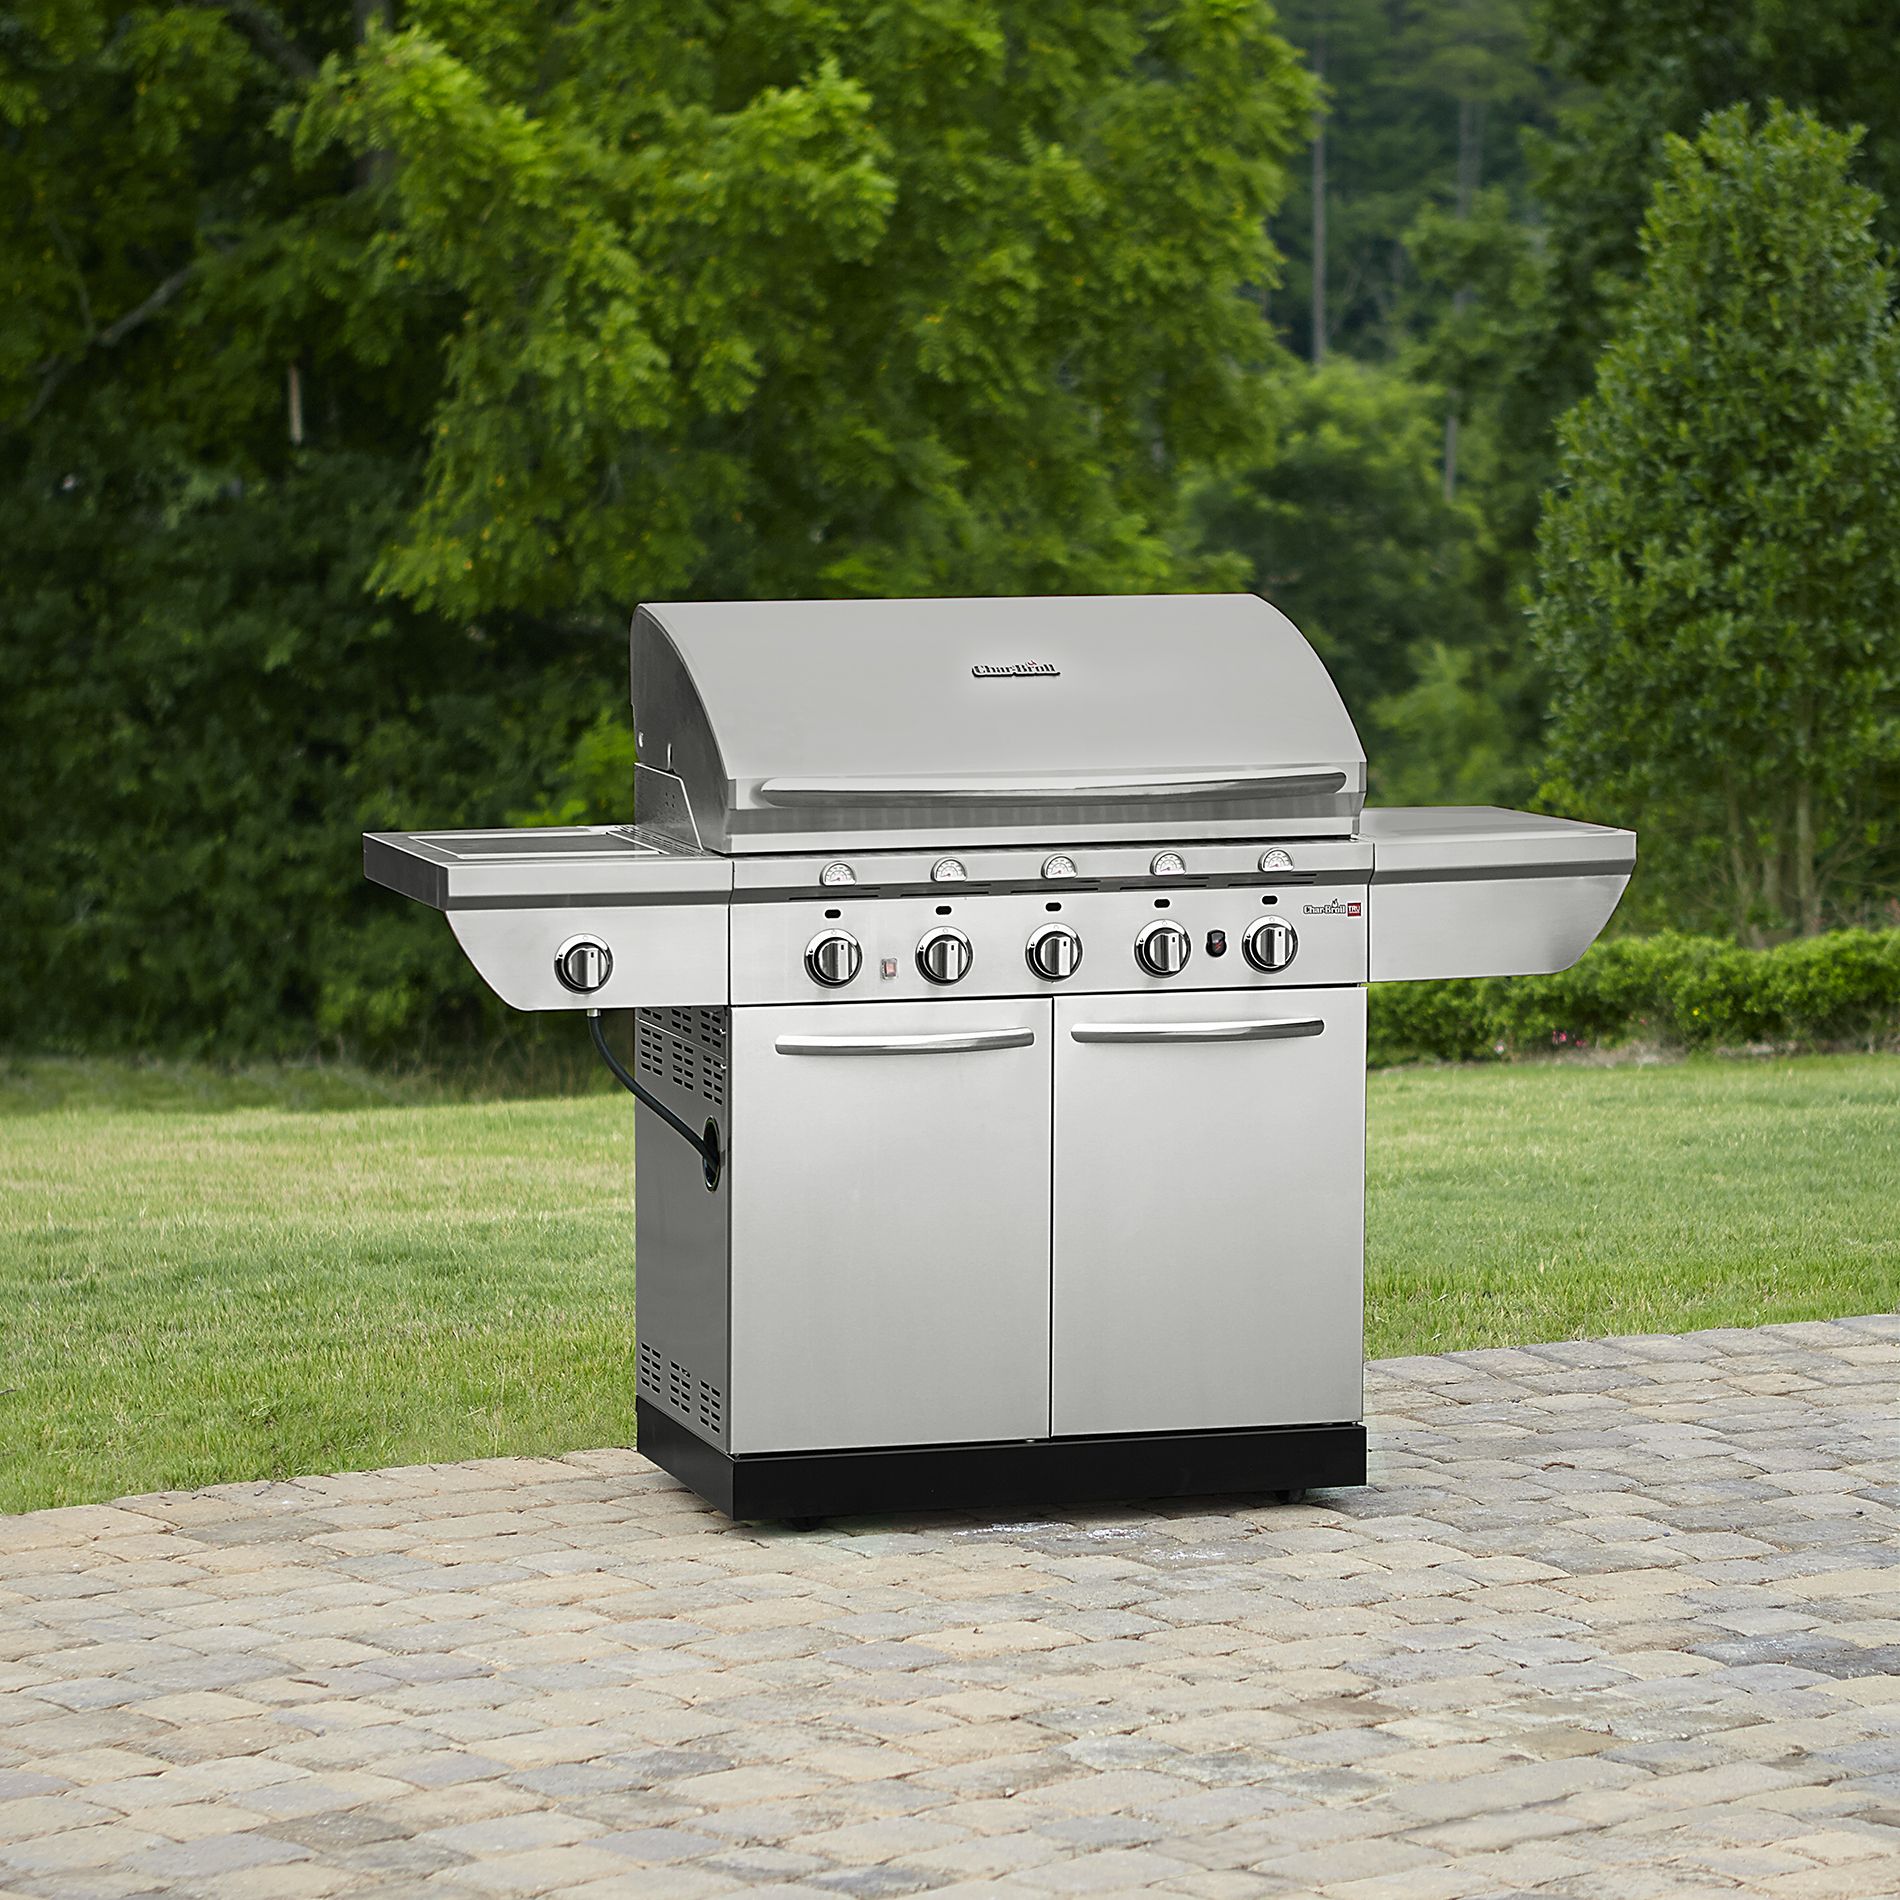 How does an infrared gas grill work?